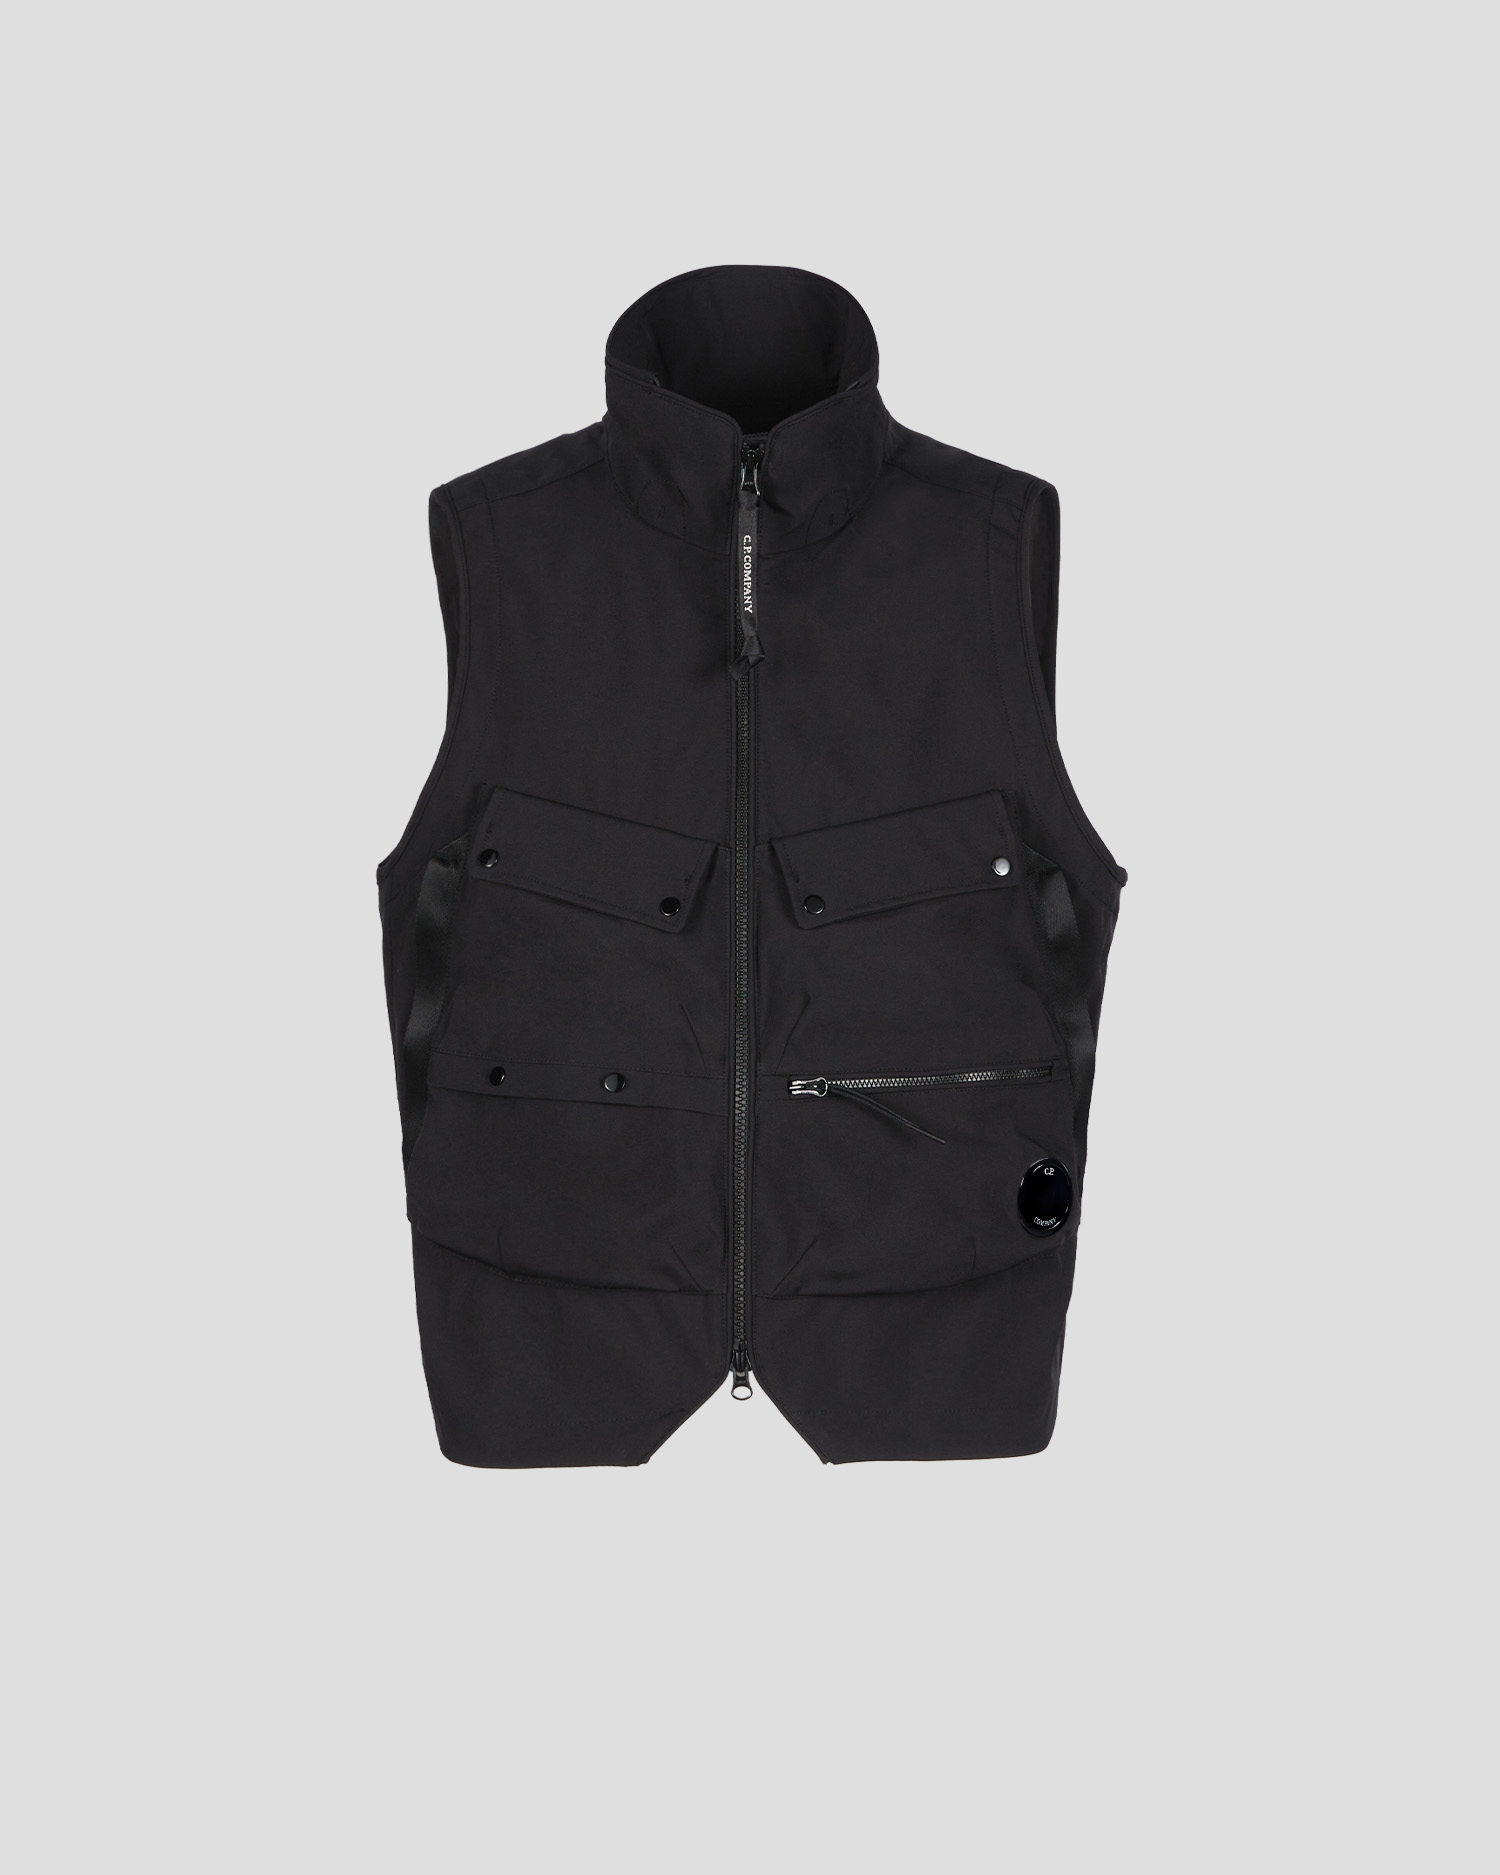 Speciaal Stad bloem Smelten C.P. Shell-R Vest | C.P. Company Online Store